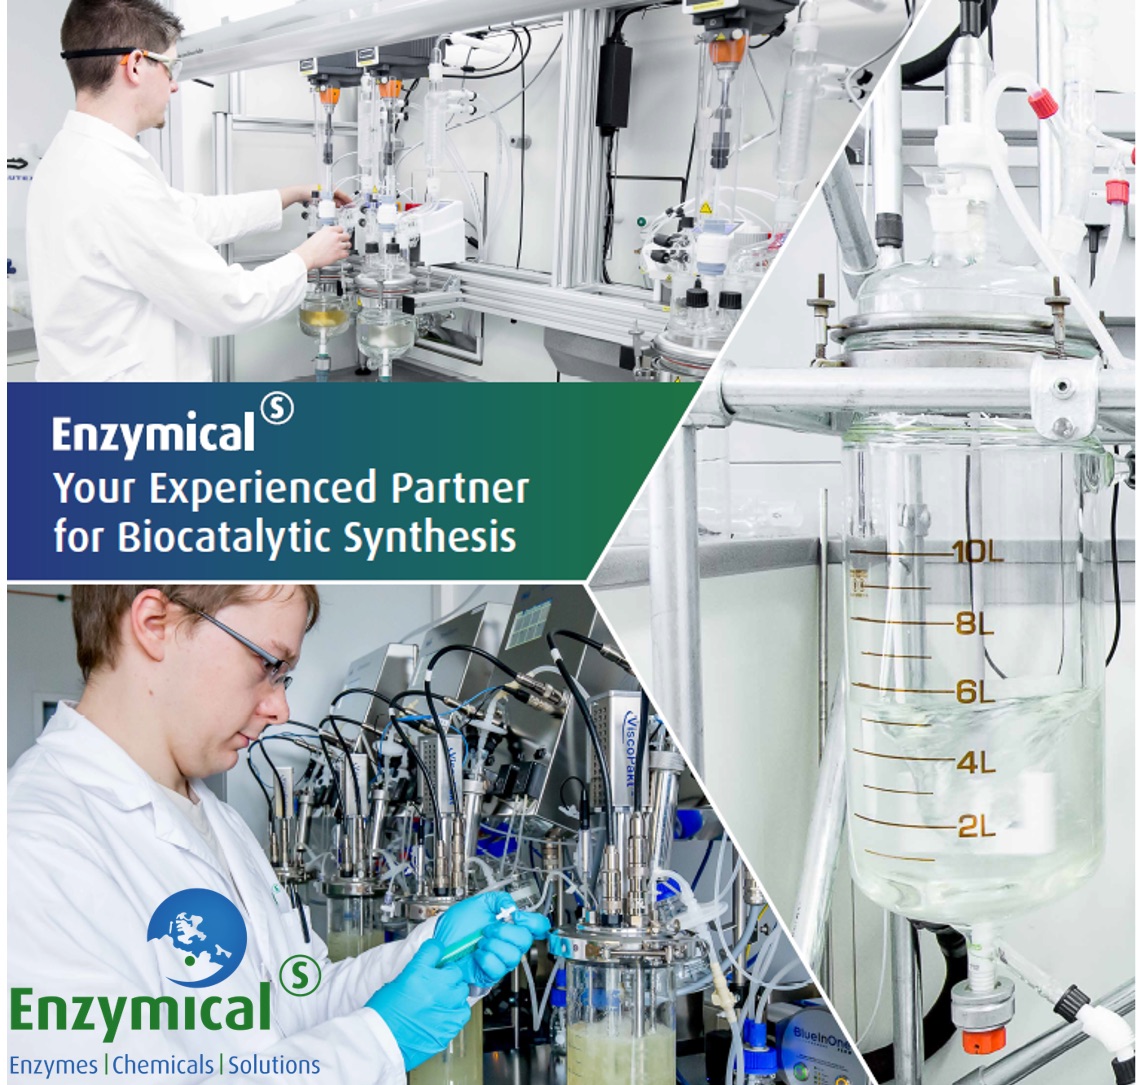 Synthetic approaches with Enzymicals recombinant pig liver esterases 